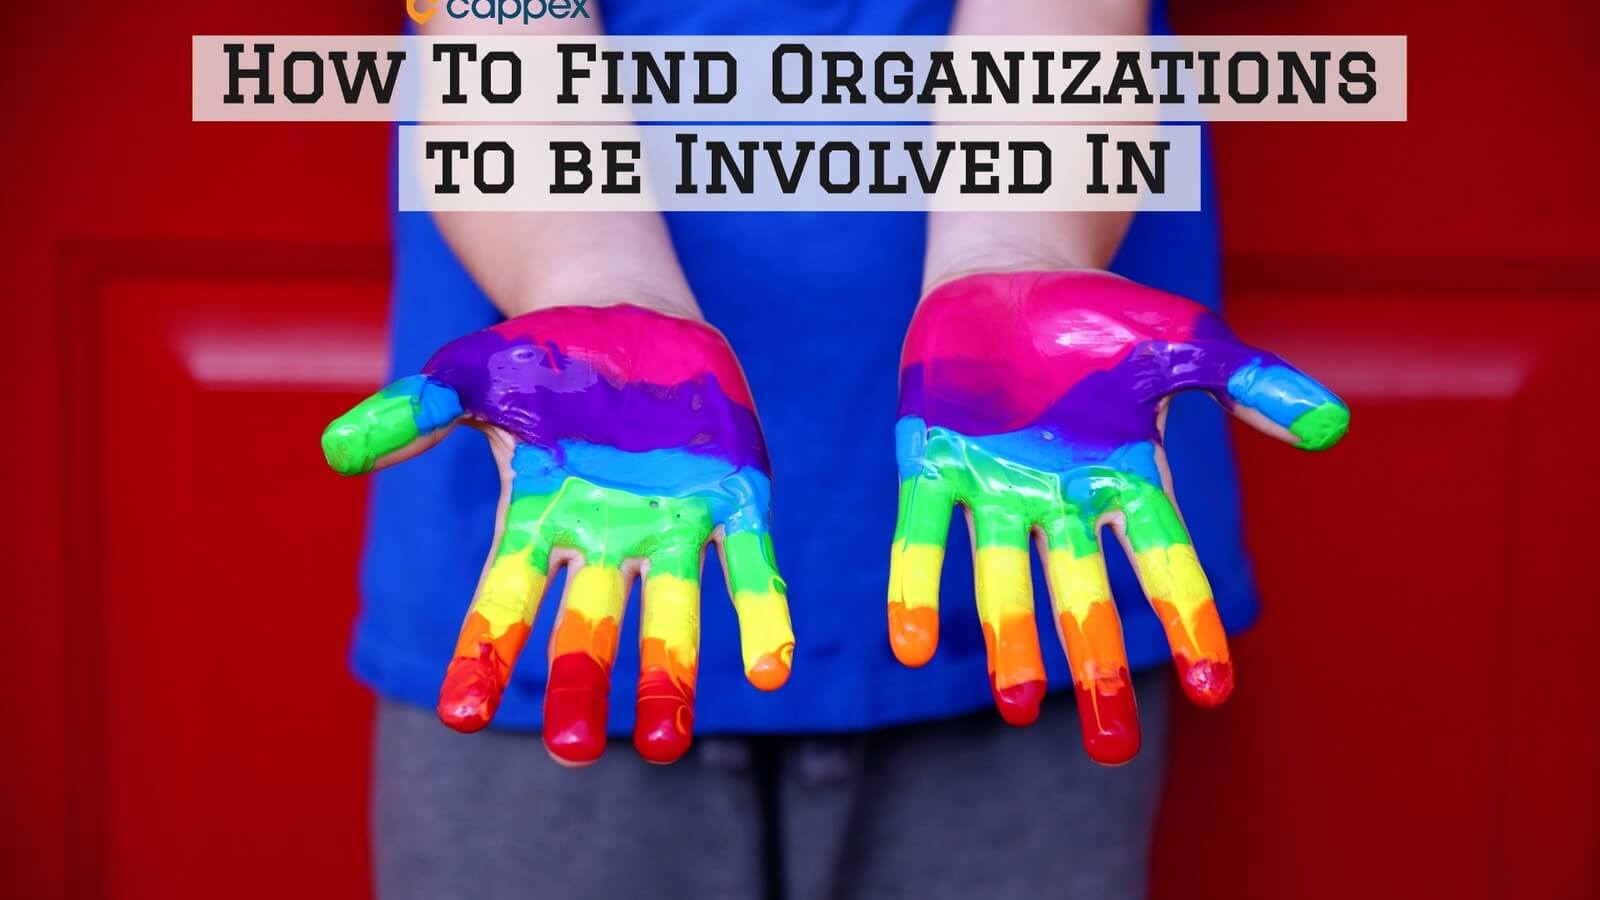 How to Find Organizations to Be Involved In